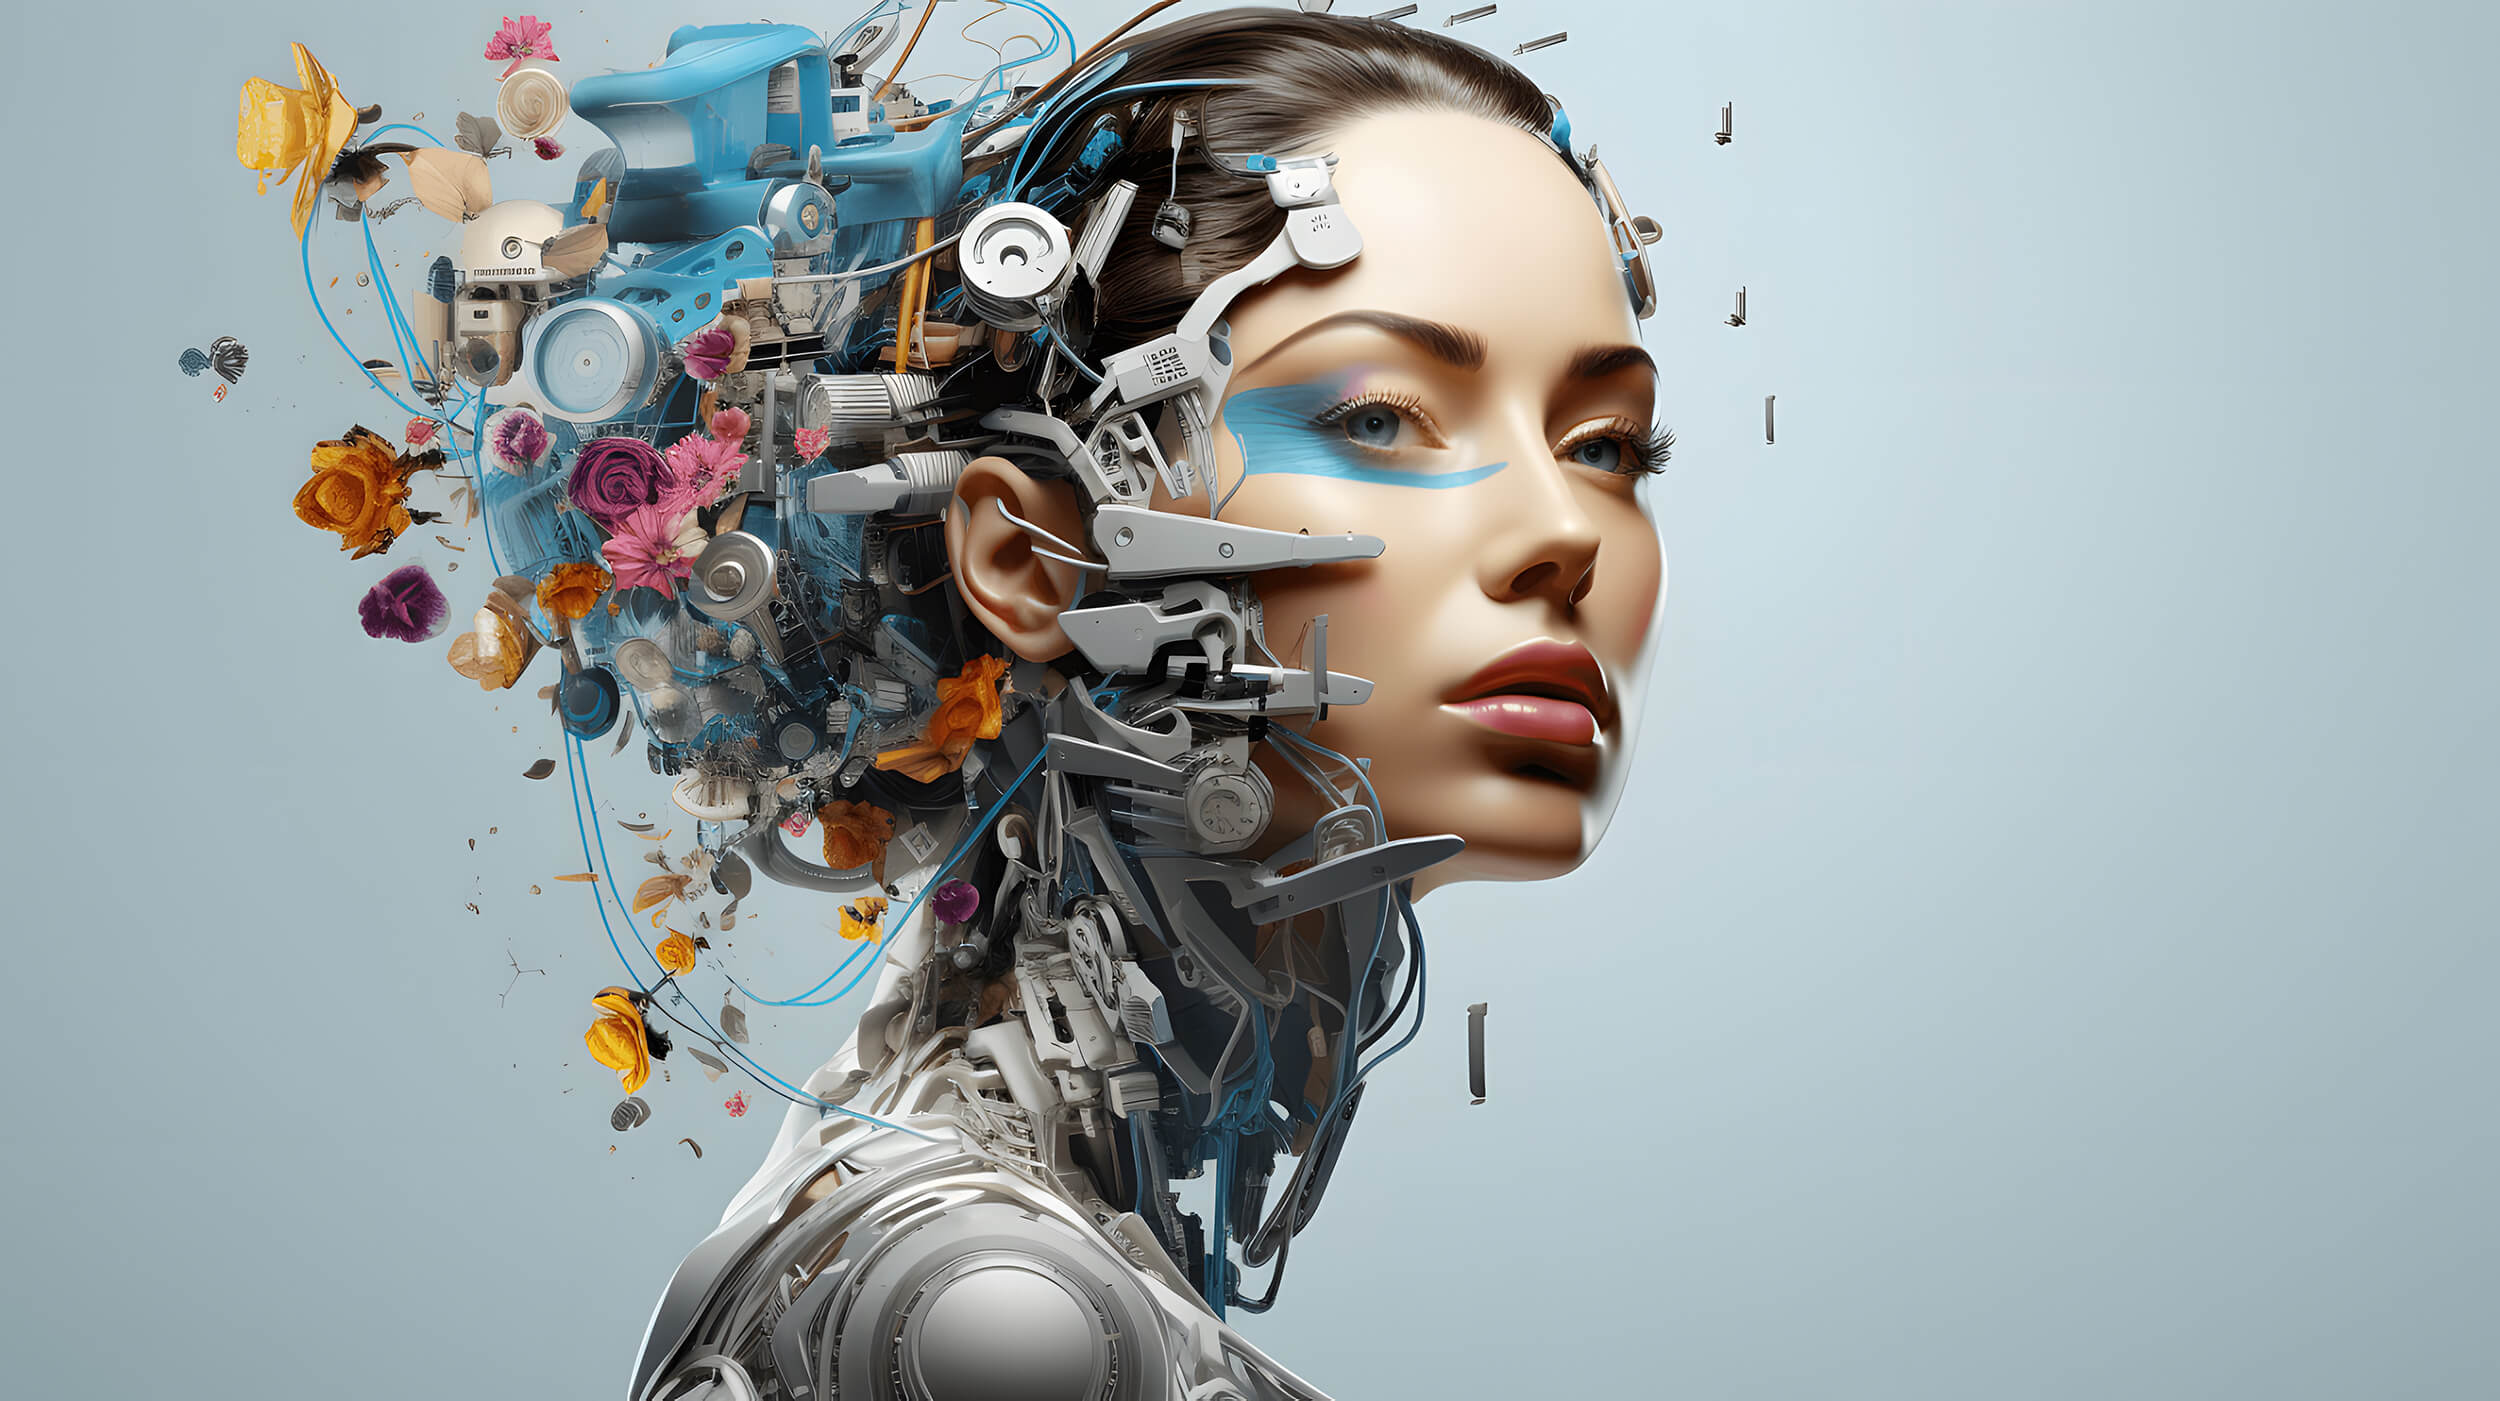 Hero Image Depicting the concept of AI art generation - a woman's face but with tech and creative elements making up a mech outer 'skin', and flowing out where her hair would be